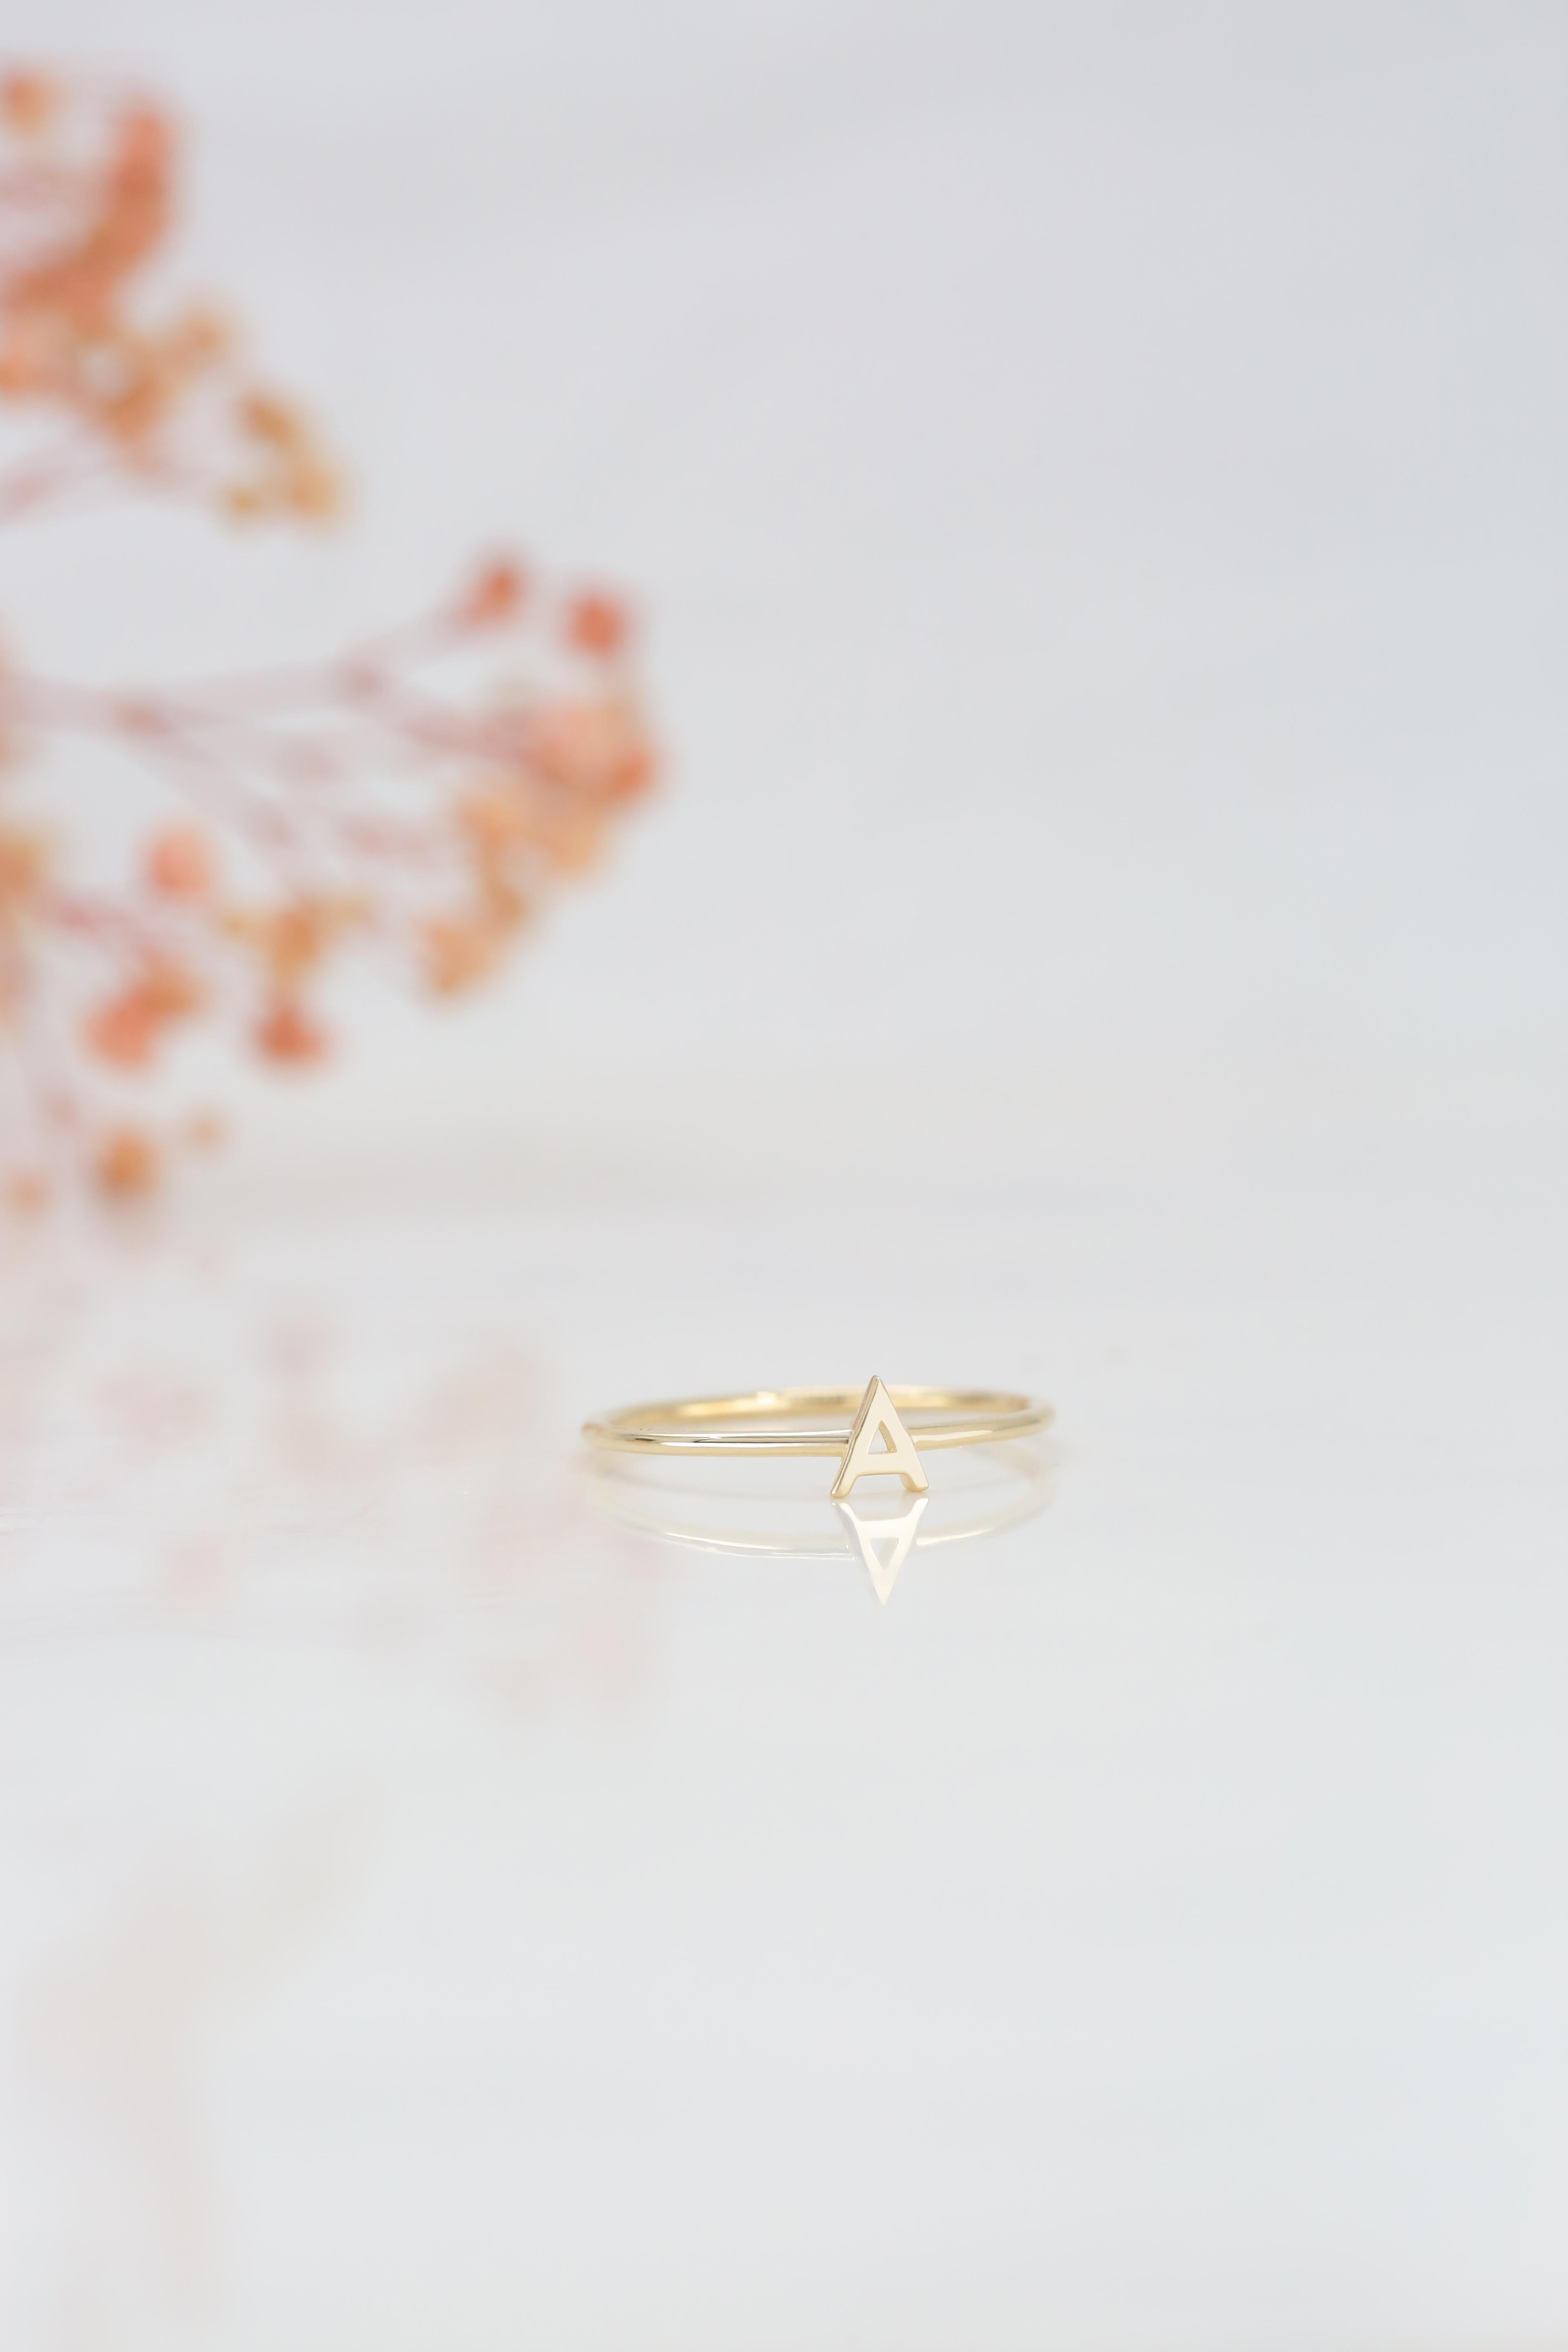 For Sale:  14K Gold Initial A Letter Ring, Personalized Initial Letter Ring 7